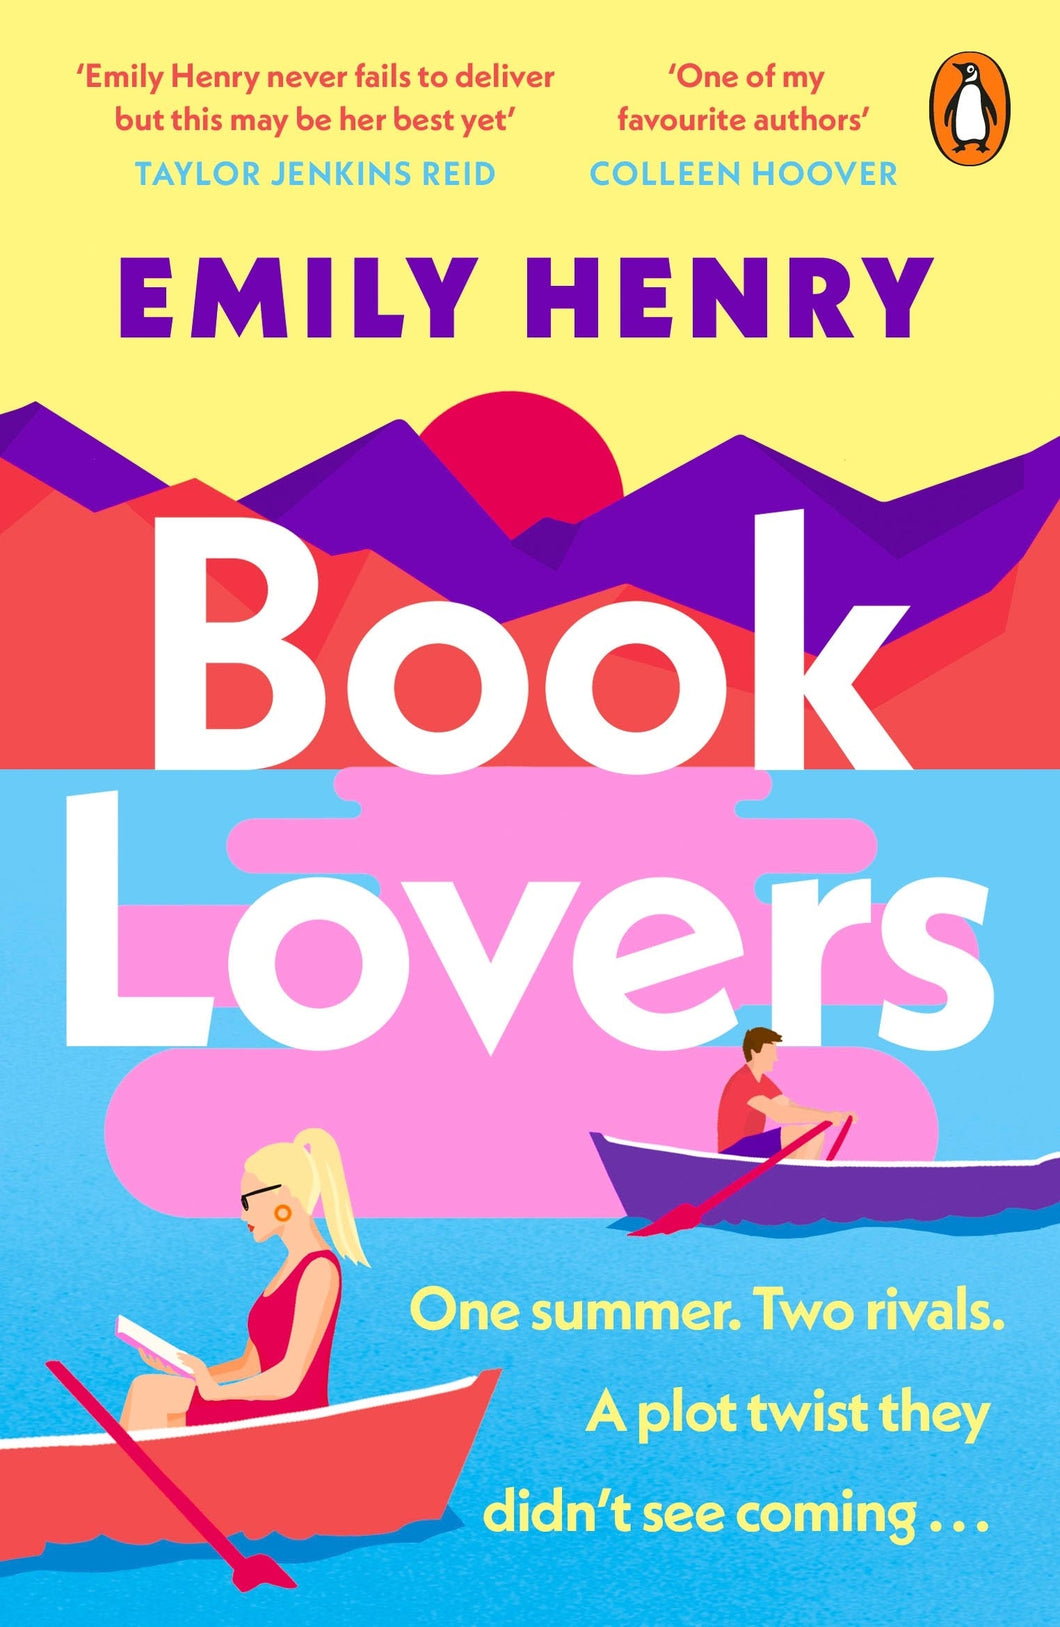 Books Lovers by Emily Henry